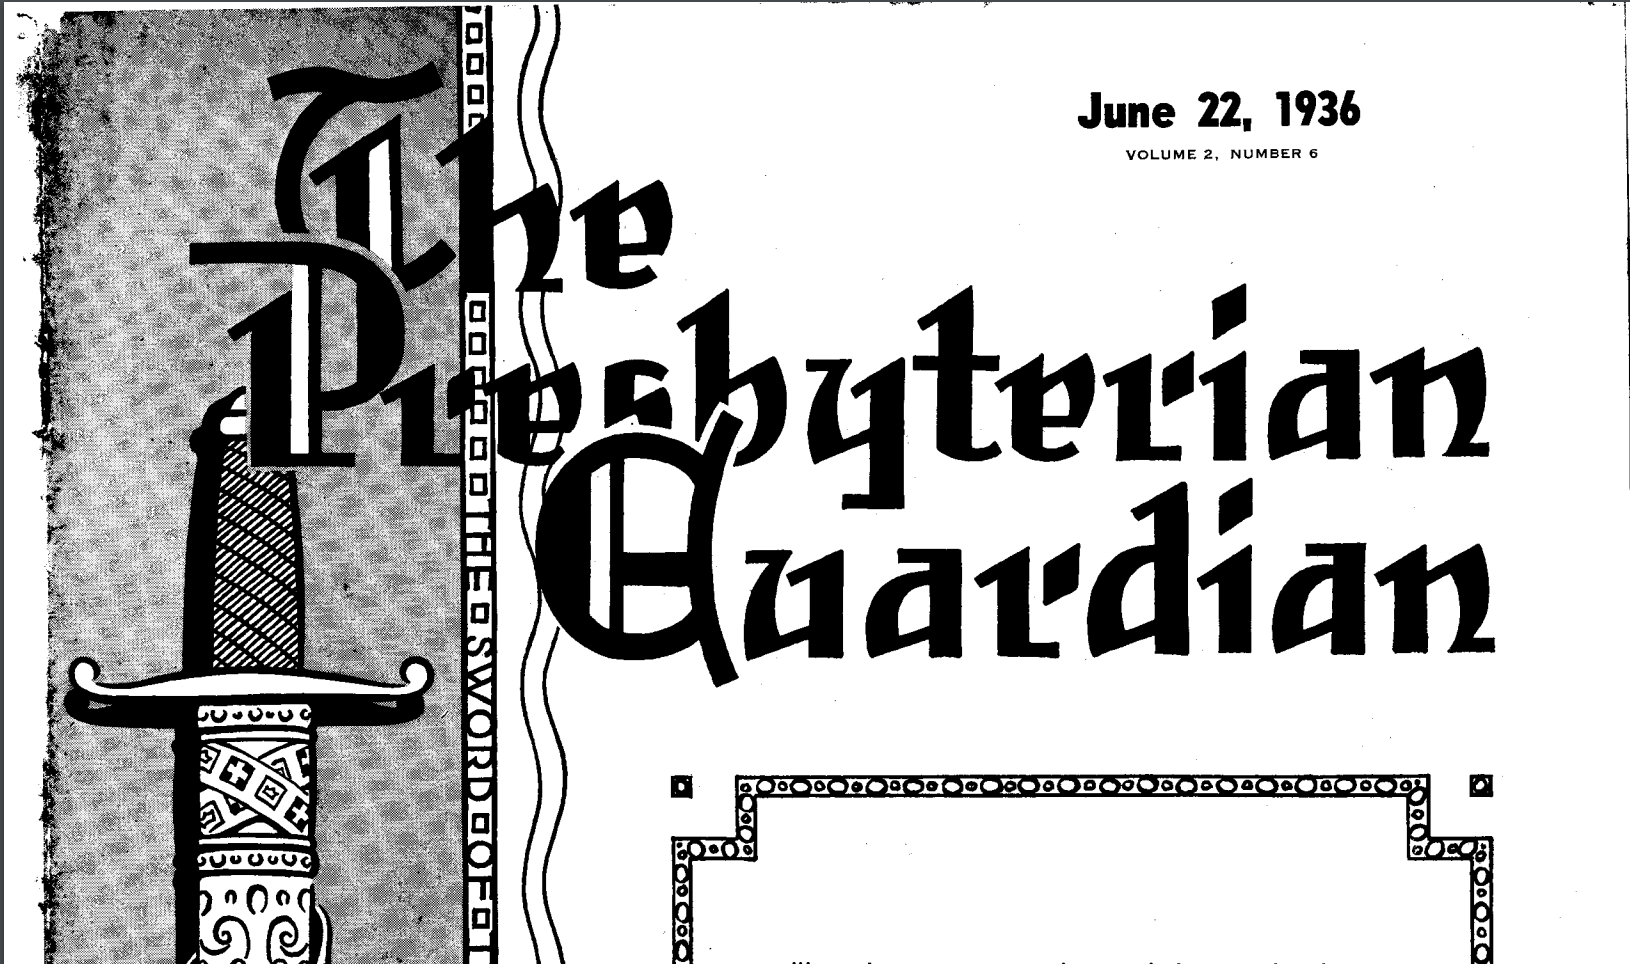 Cover of the Presbyterian Guardian